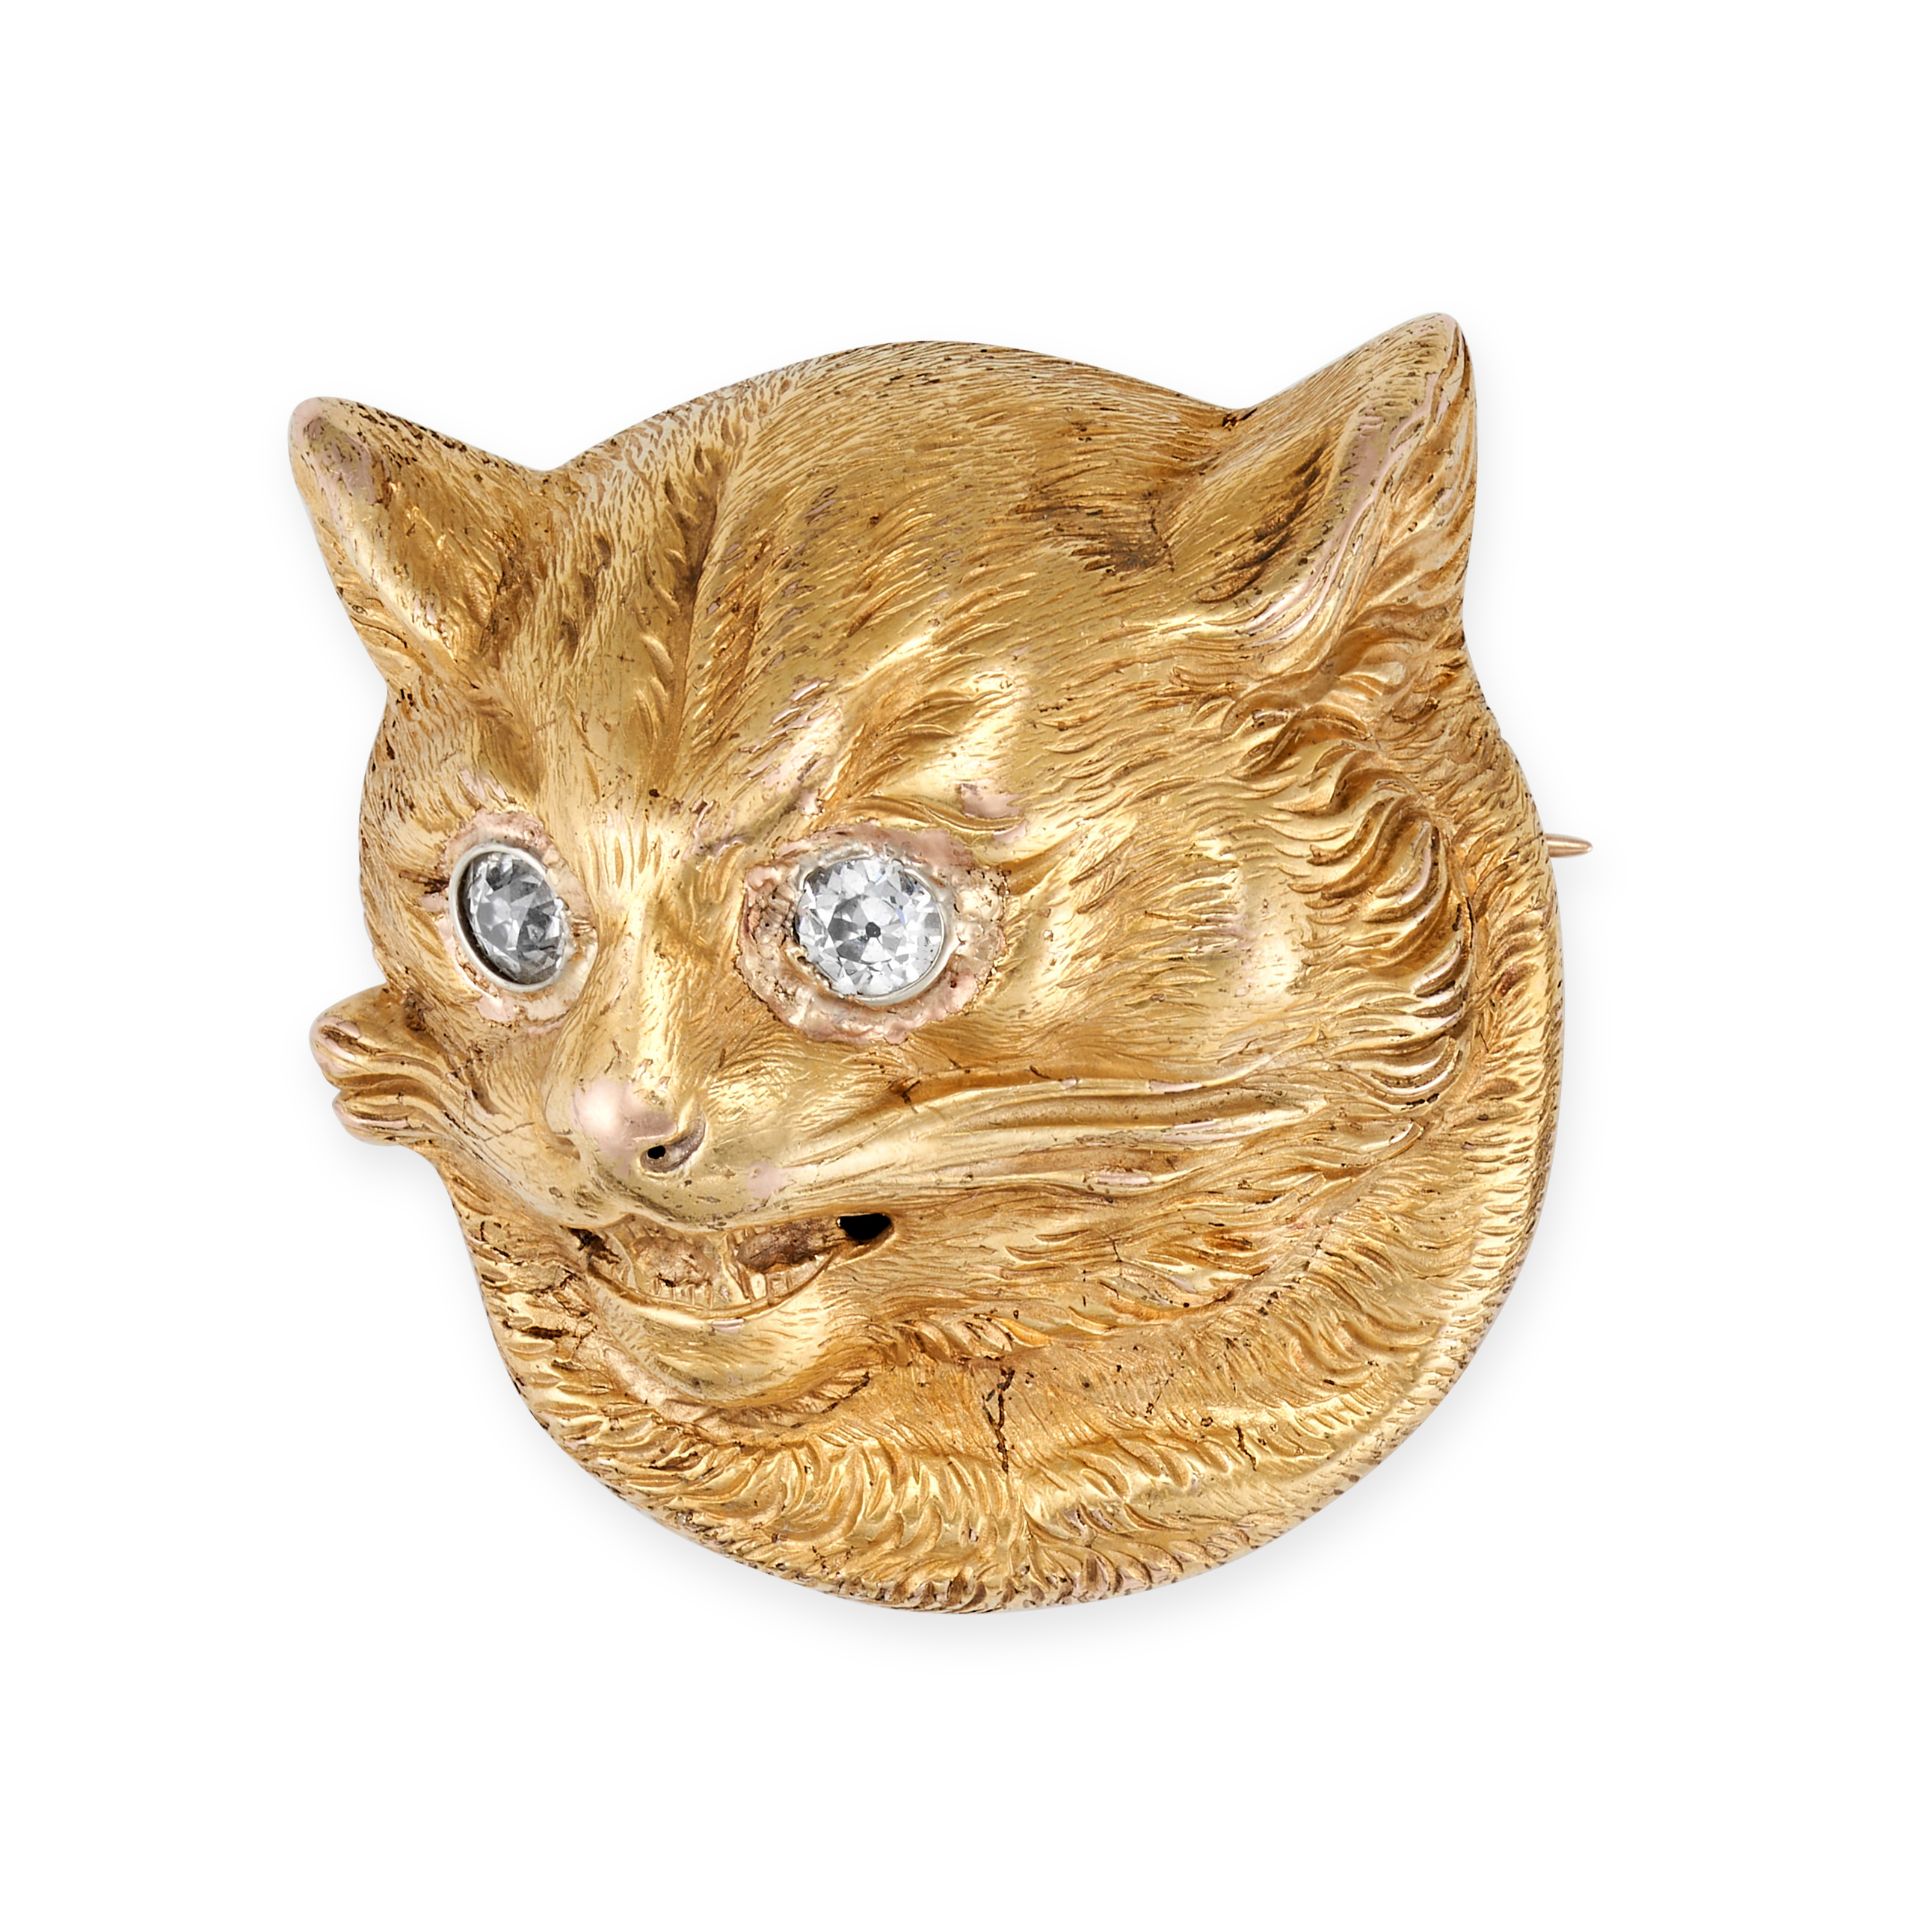 AN ANTIQUE DIAMOND CAT BROOCH in yellow gold, designed as the head of a cat, the eyes set with ol...